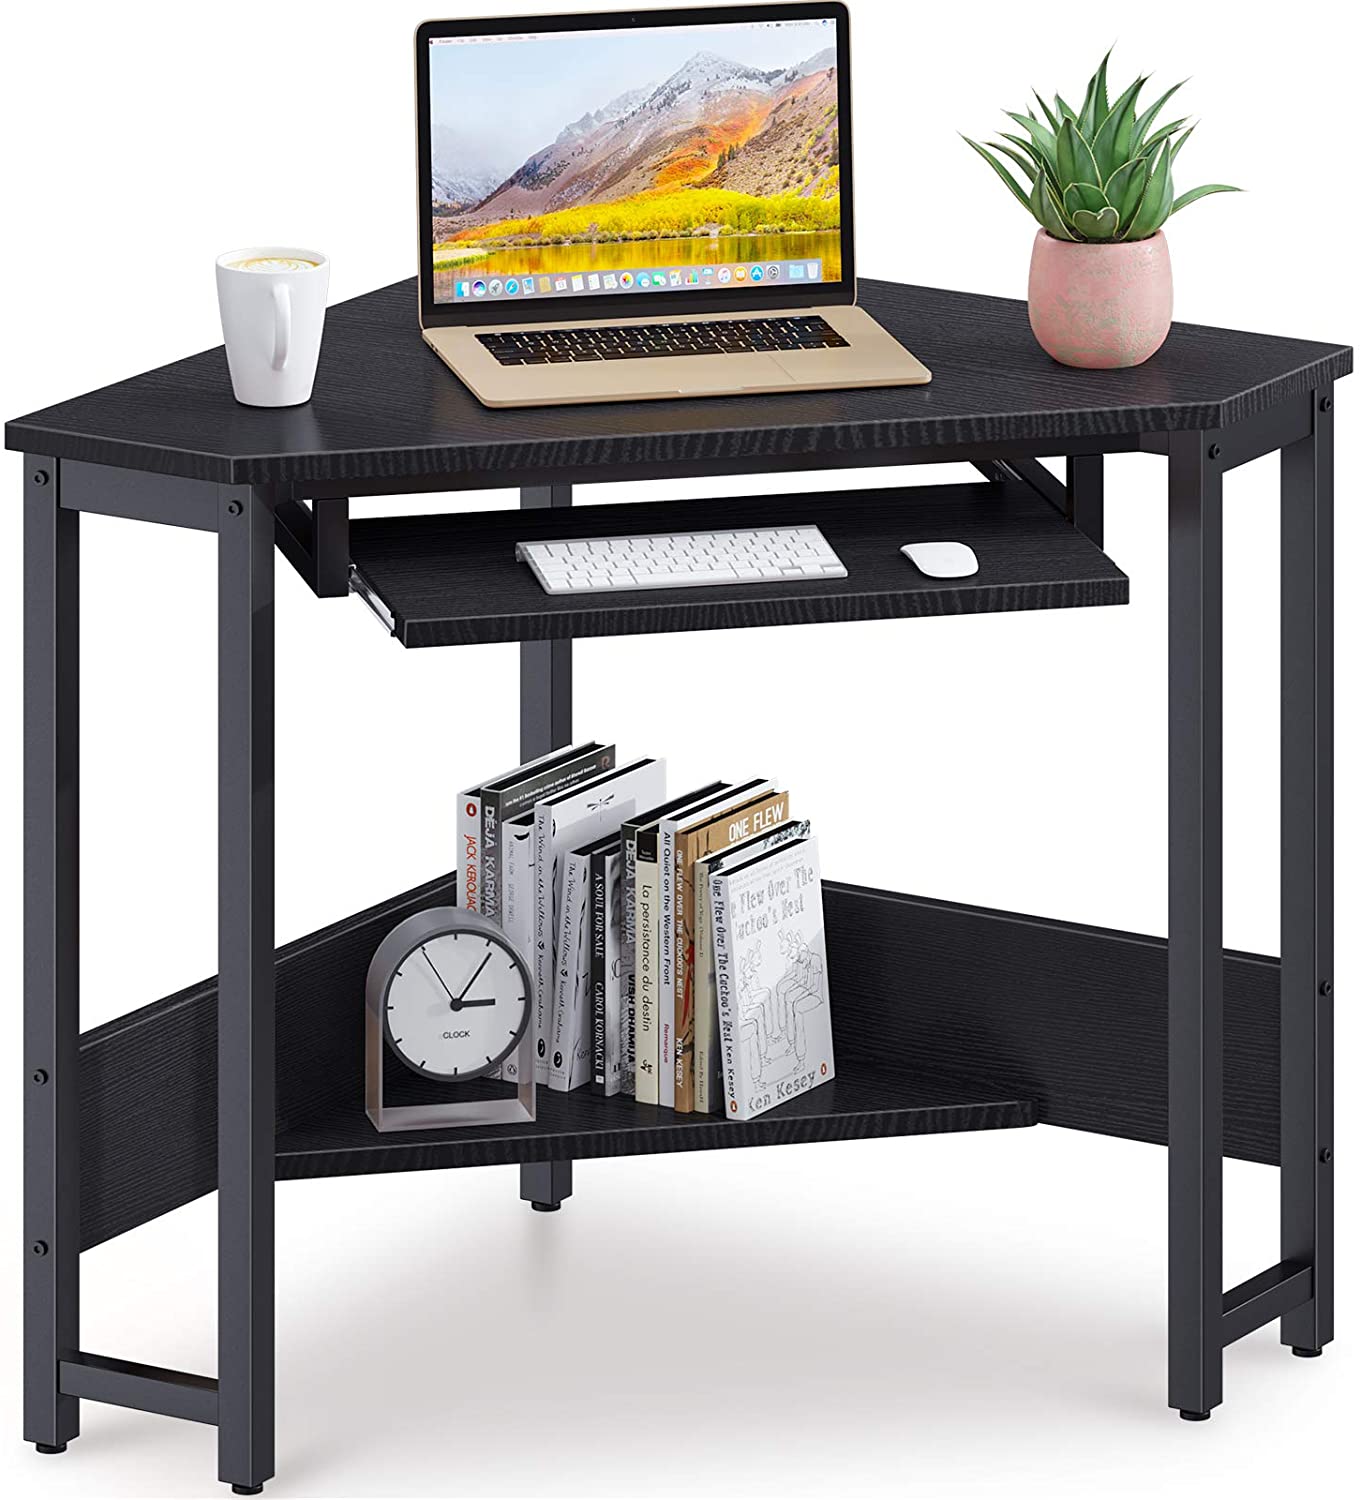 SUGIFT Triangle Computer Desk,Corner Computer Desk Laptop Writing Table Wood Workstation Home Office Furniture,Smooth Keyboard Tray& Storage Shelves,hps,28.34inL 24inW 30.11inH,Black